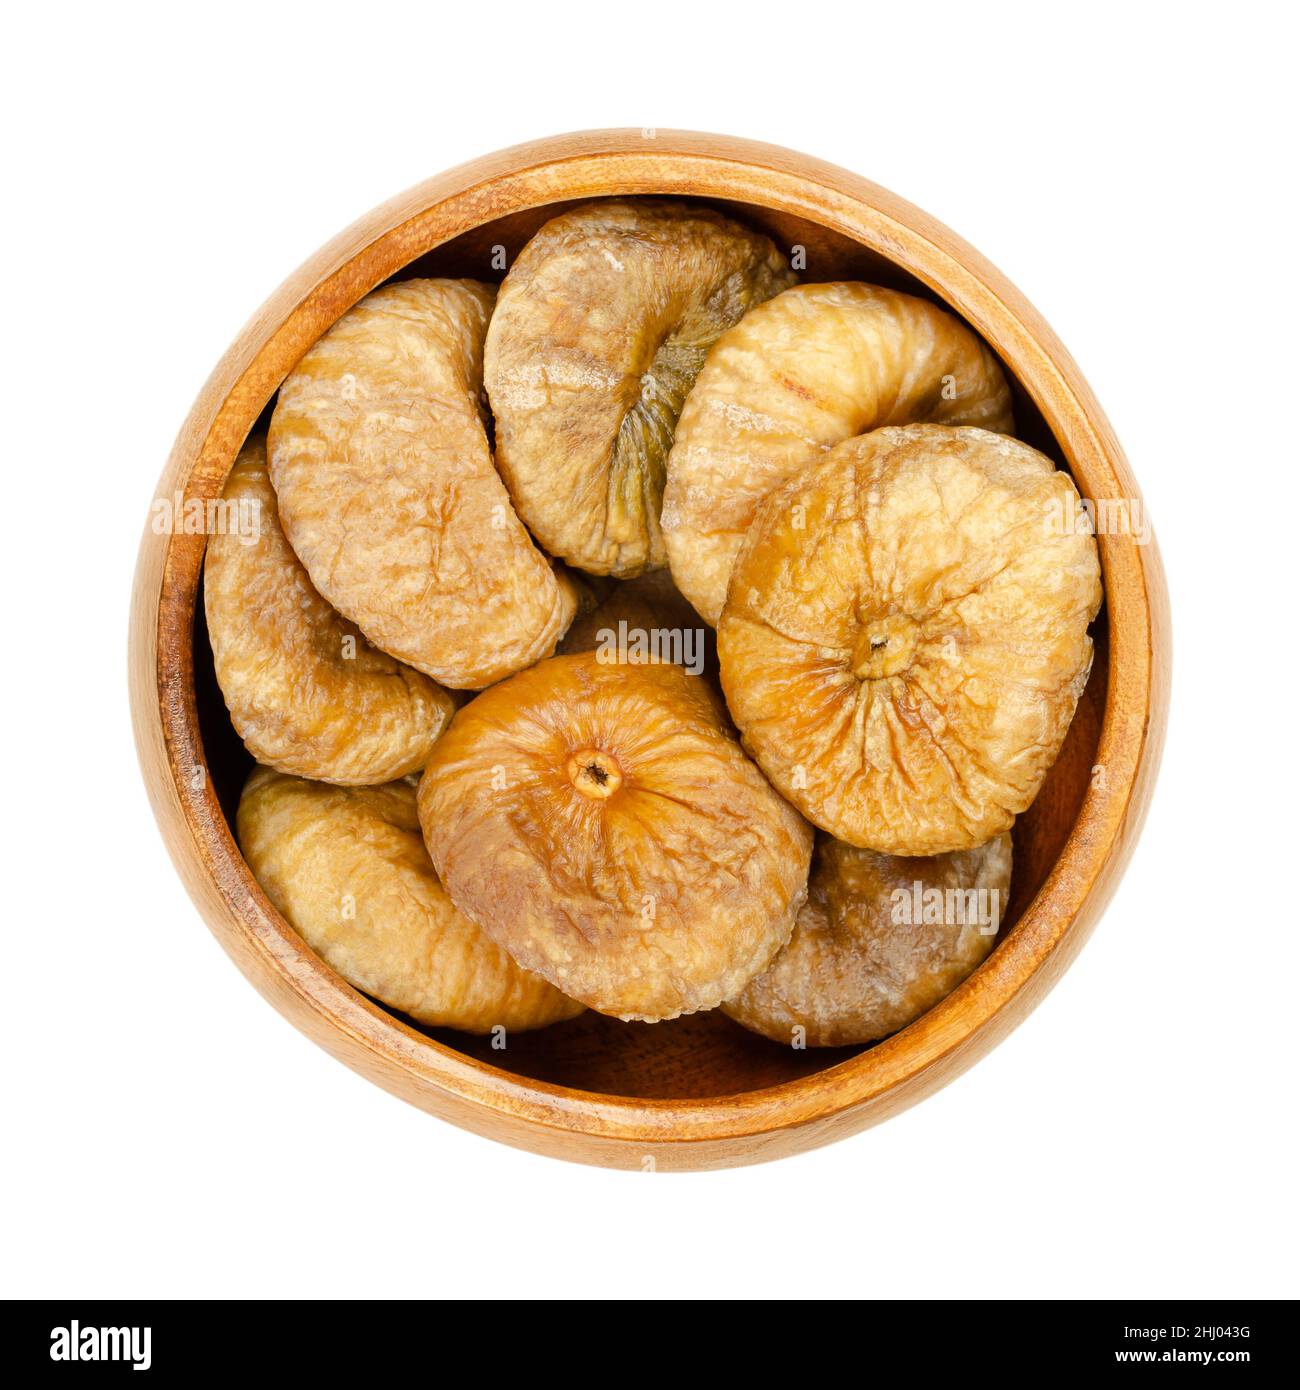 Dried figs in a wooden bowl. Sun dried, ripe and whole common figs, edible and uncooked fruits of Ficus carica, a popular snack in the wintertime. Stock Photo